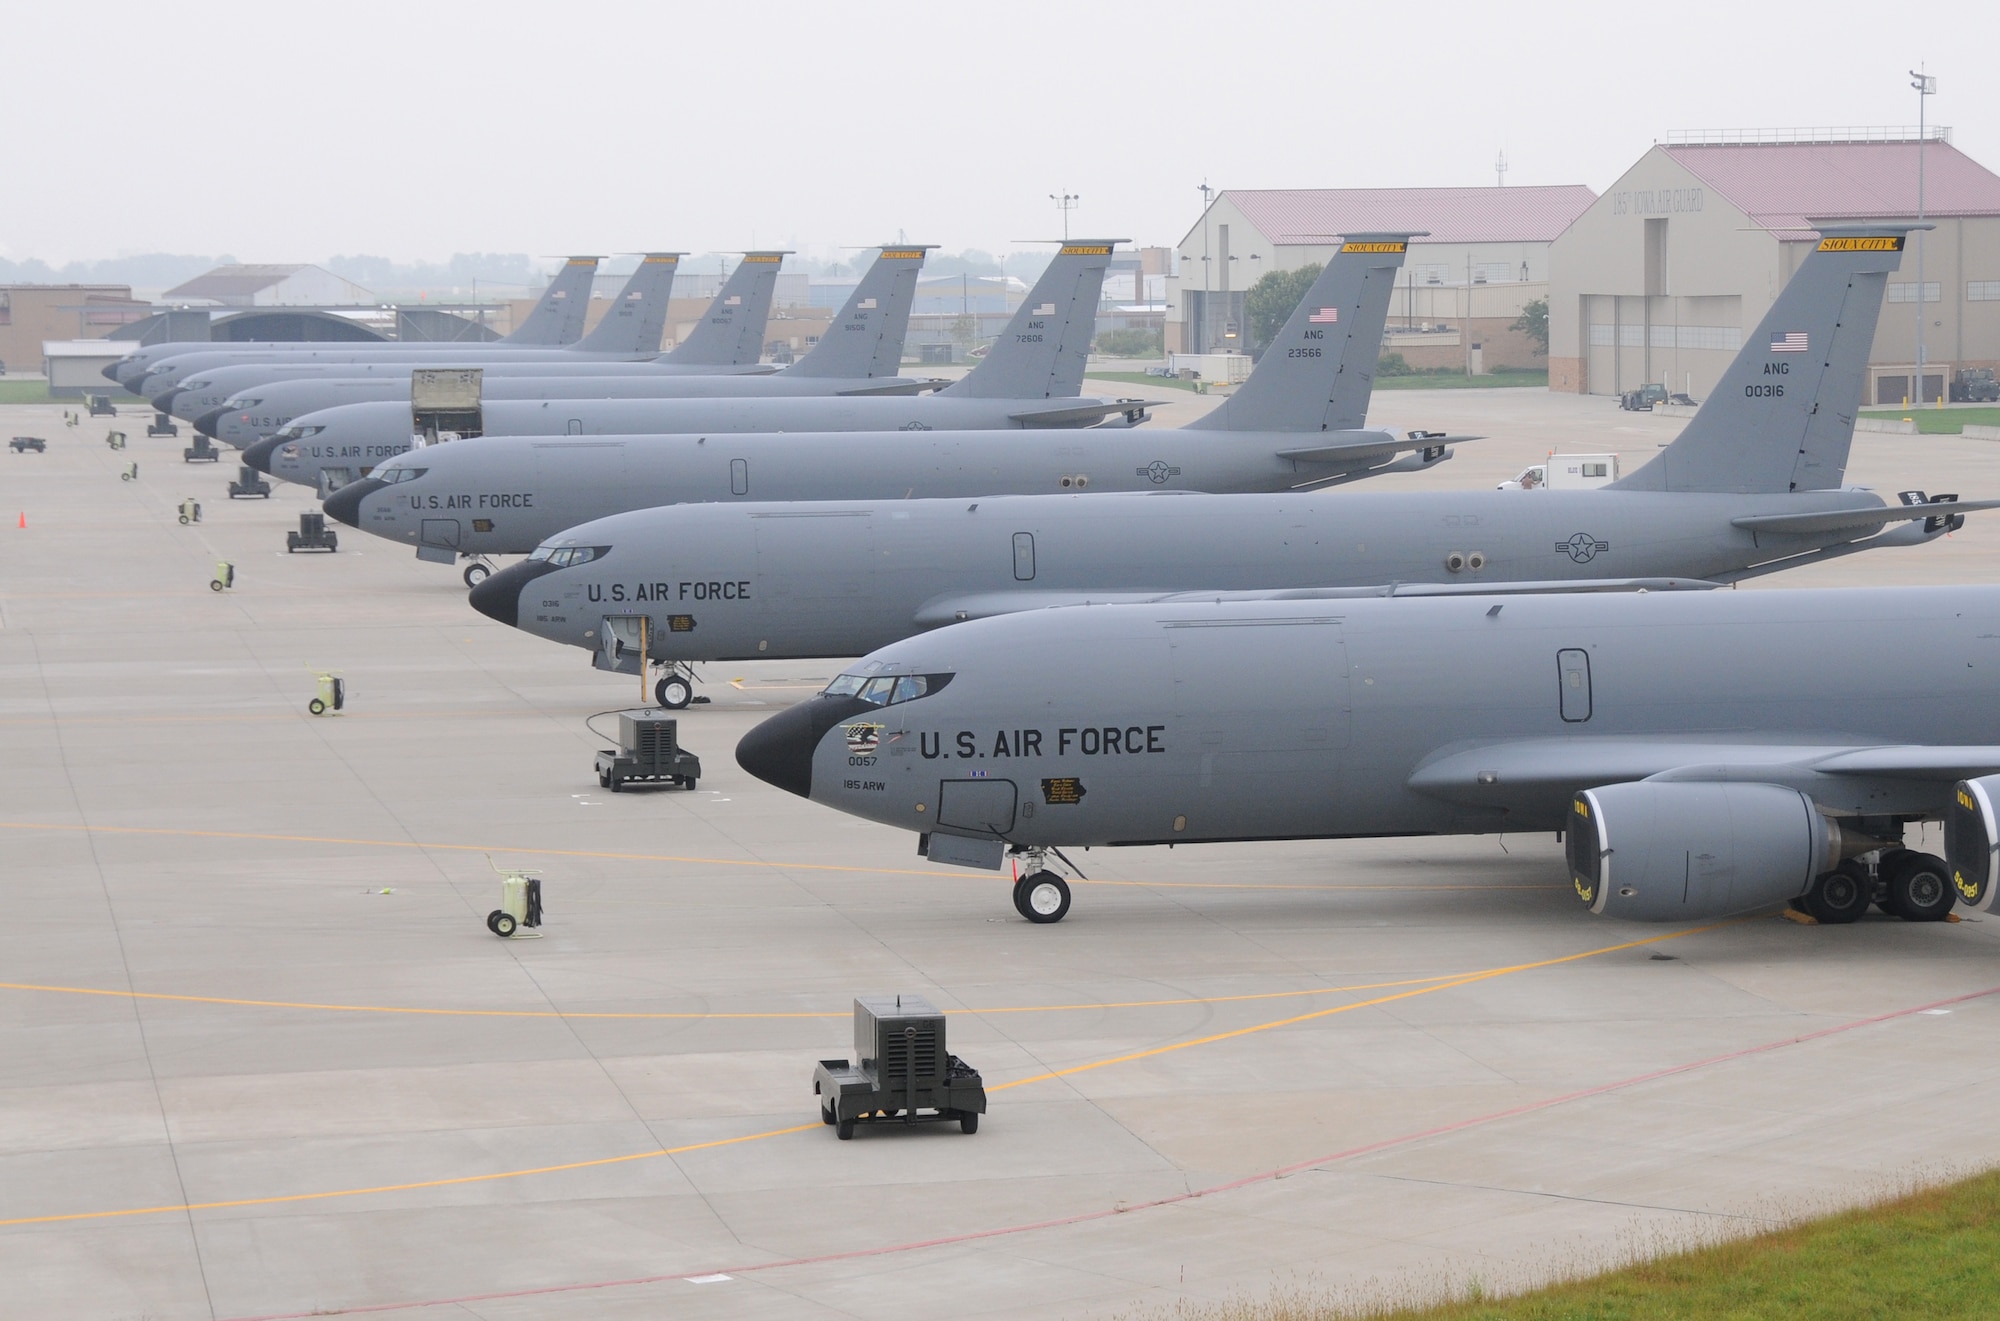 All eight KC-135 "R" model aircraft assigned to the 185th Air Refueling Wing of the Iowa Air National Guard are on the ramp at Sioux City, Iowa. Given the operations tempo for the mid-air refueling aircraft this is a rare site for the Guard Wing based in Sioux City. The photo opportunity lasted for only a few hours on Tuesday, September 8, 2009.
USAF Photo by: MSgt Vincent De Groot
185th ARW Public Affairs, Iowa Air National Guard
